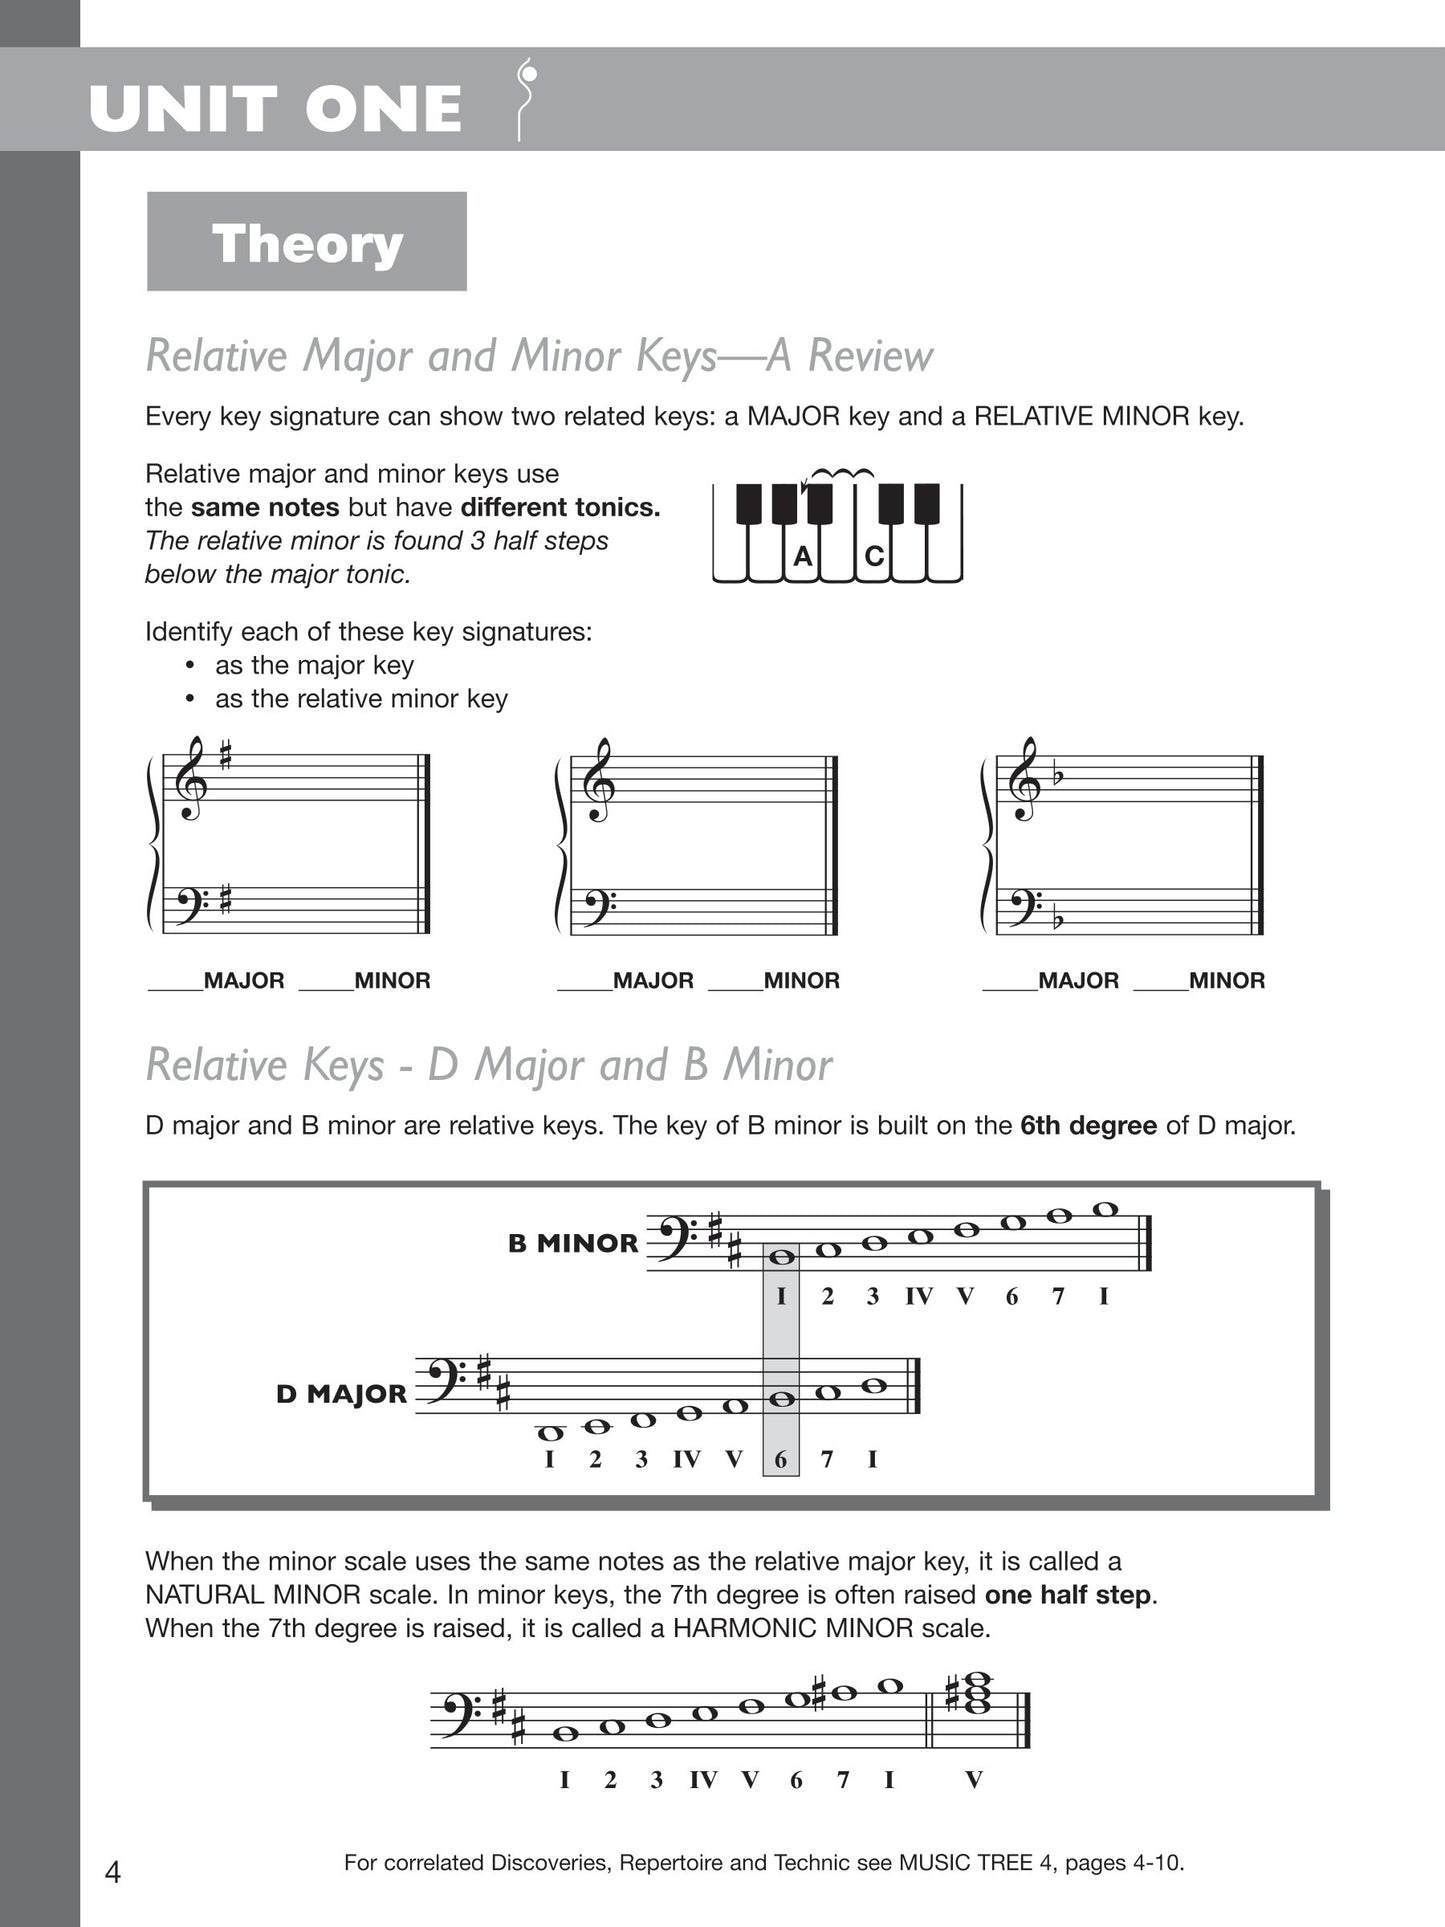 The Music Tree - Part 4 Activities Book